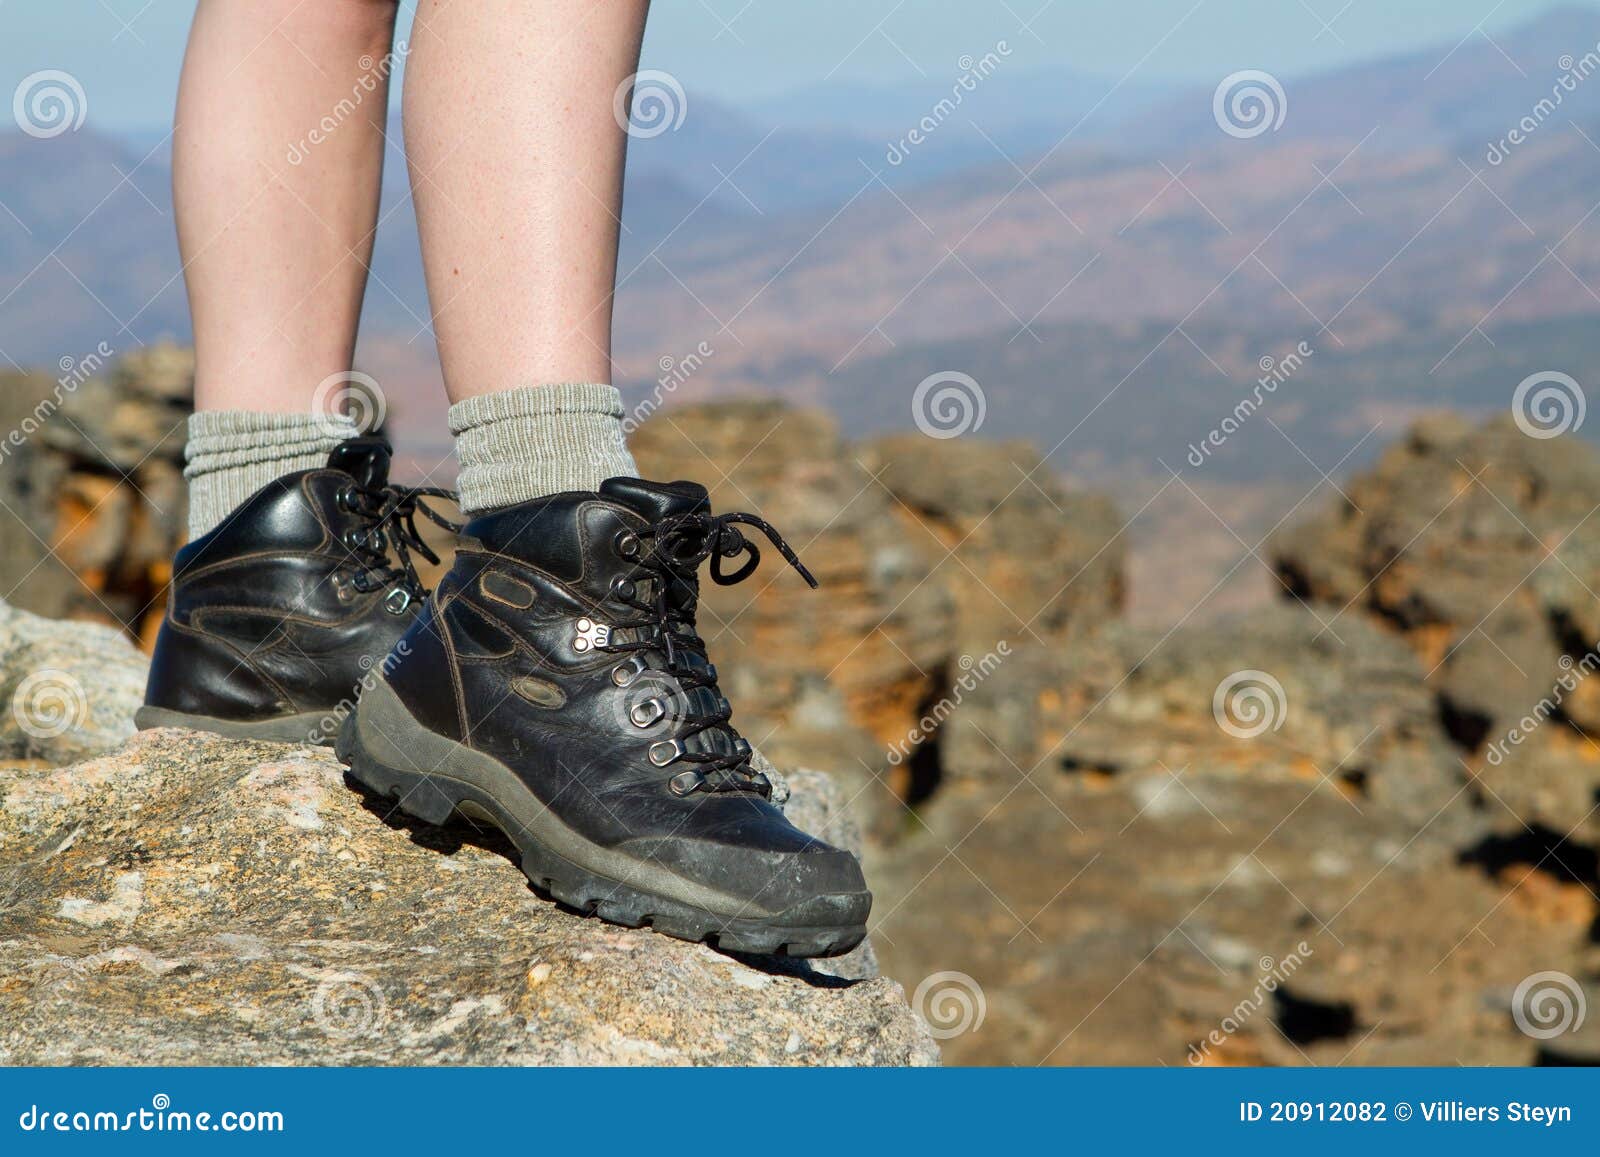 Hiking boots stock photo. Image of socks, rubber, lifestyle - 20912082